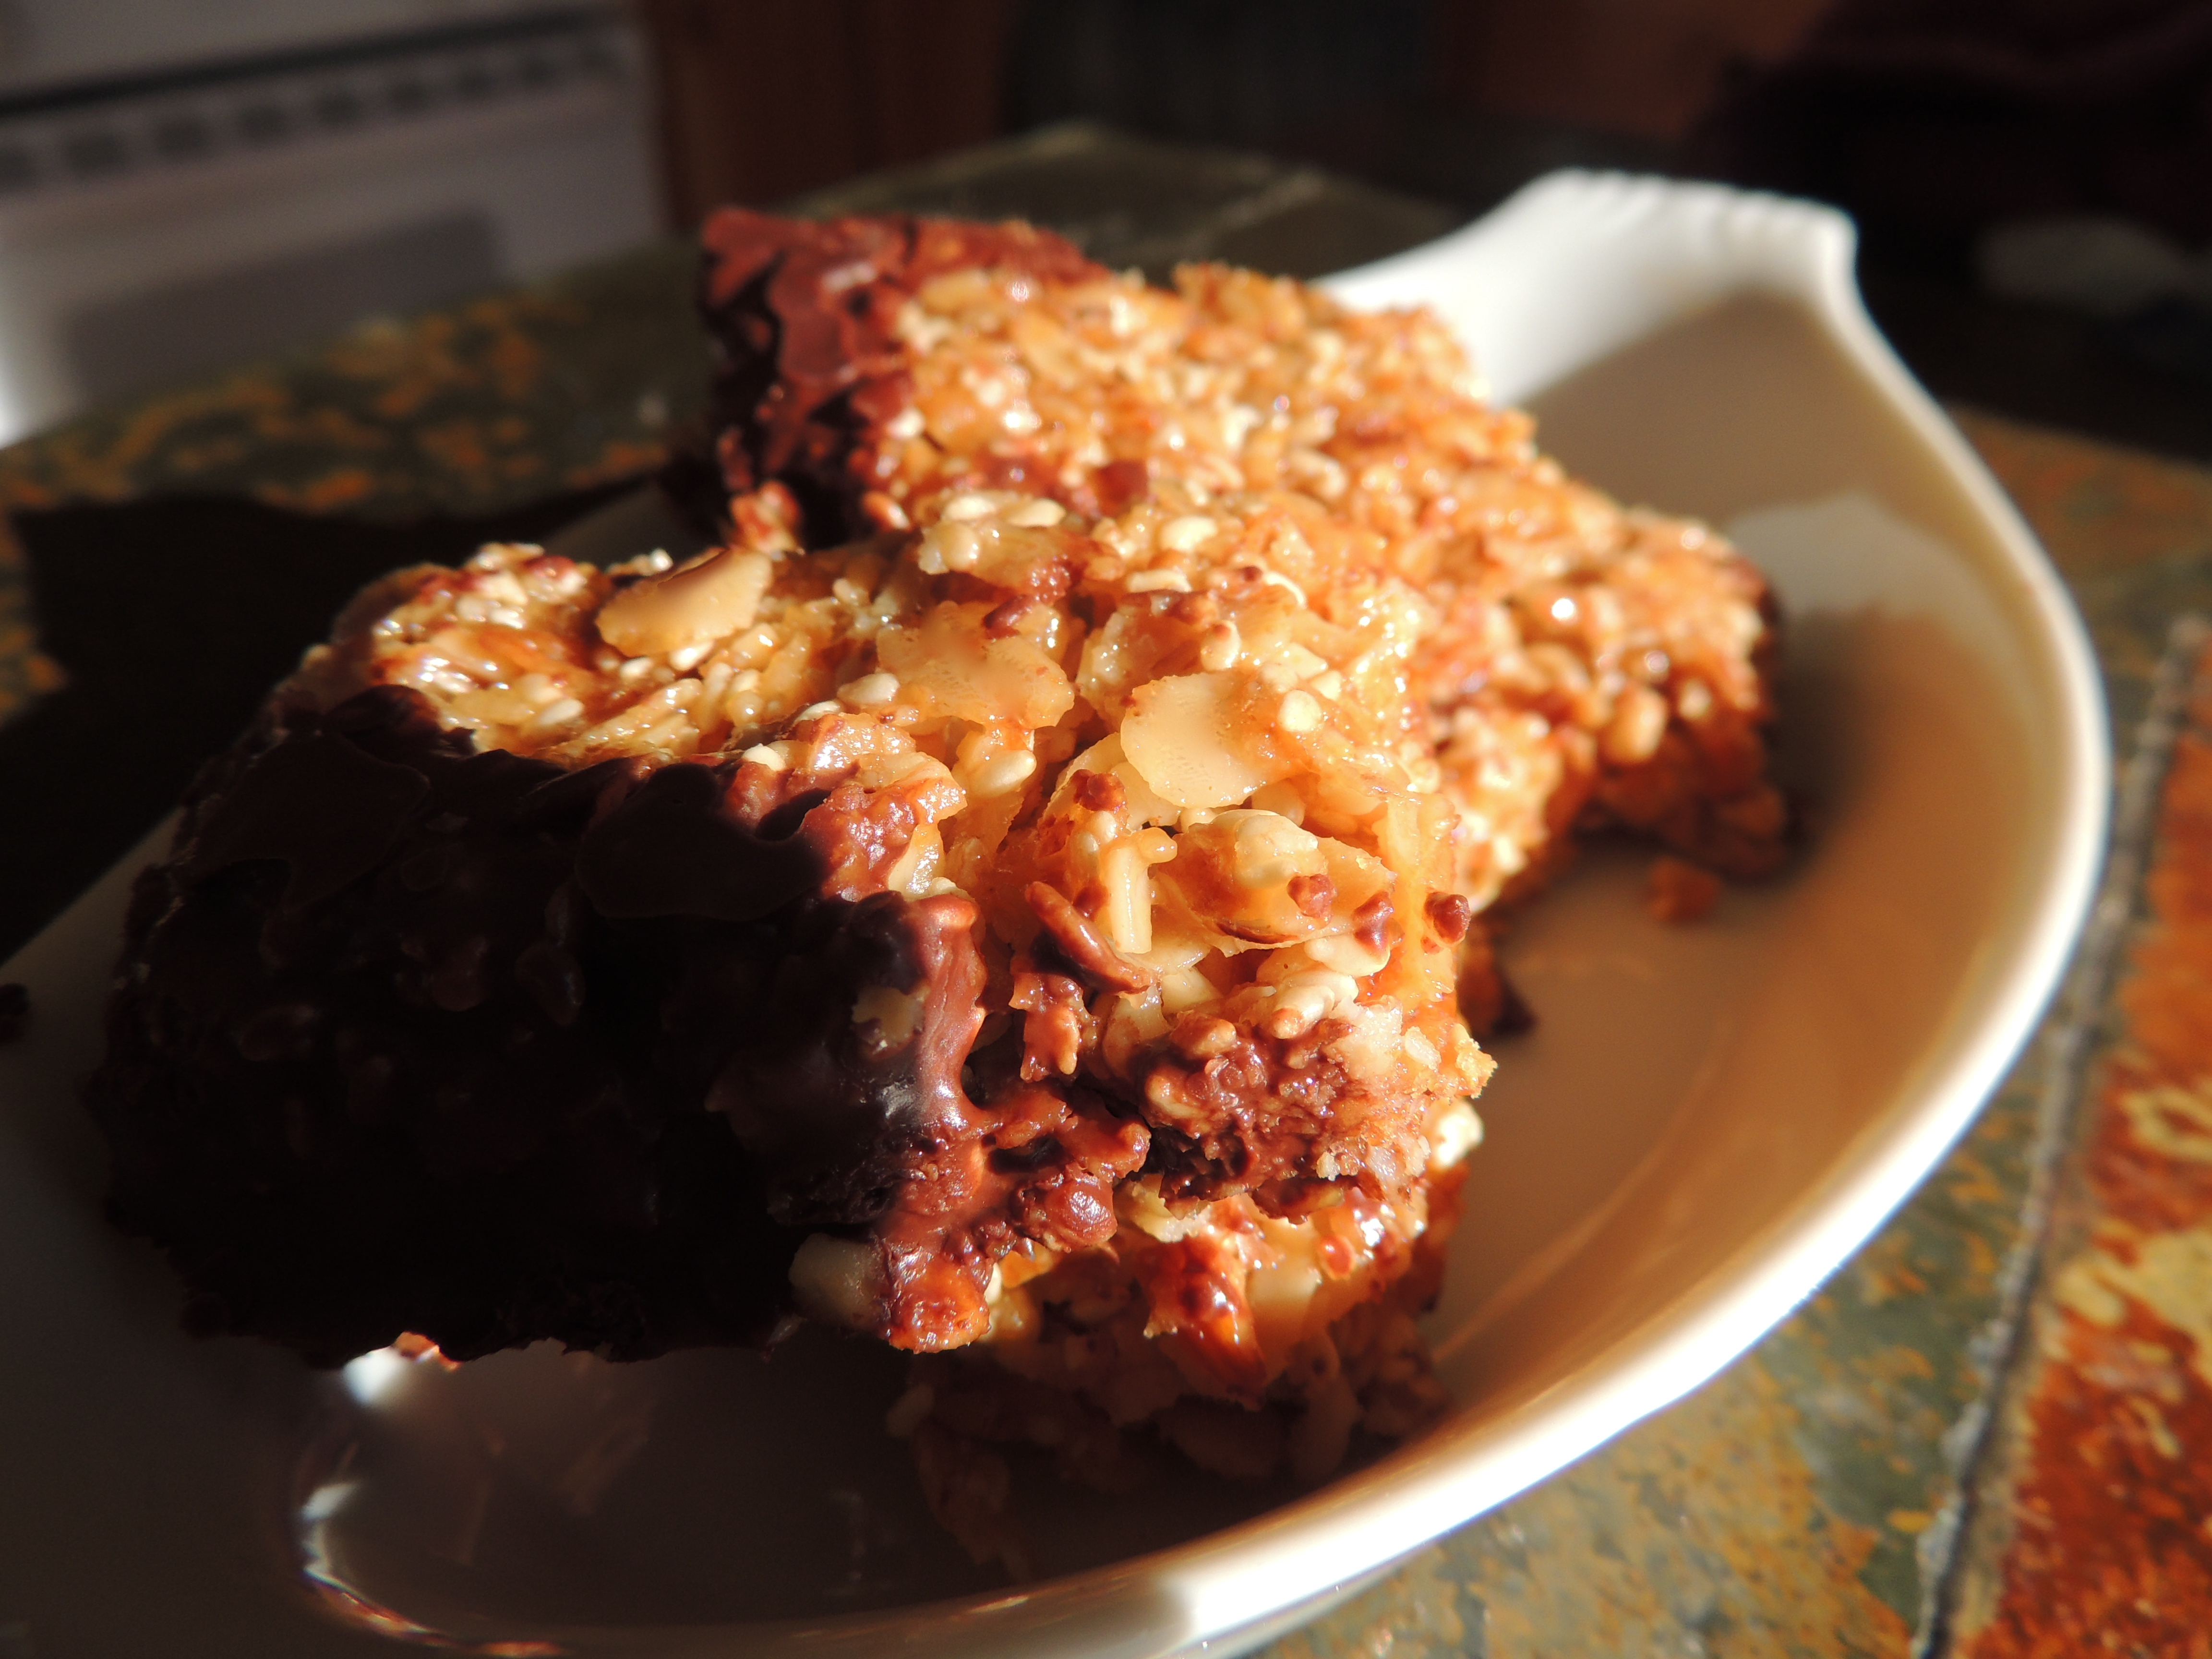 sprouted nut gluten-free energy bar